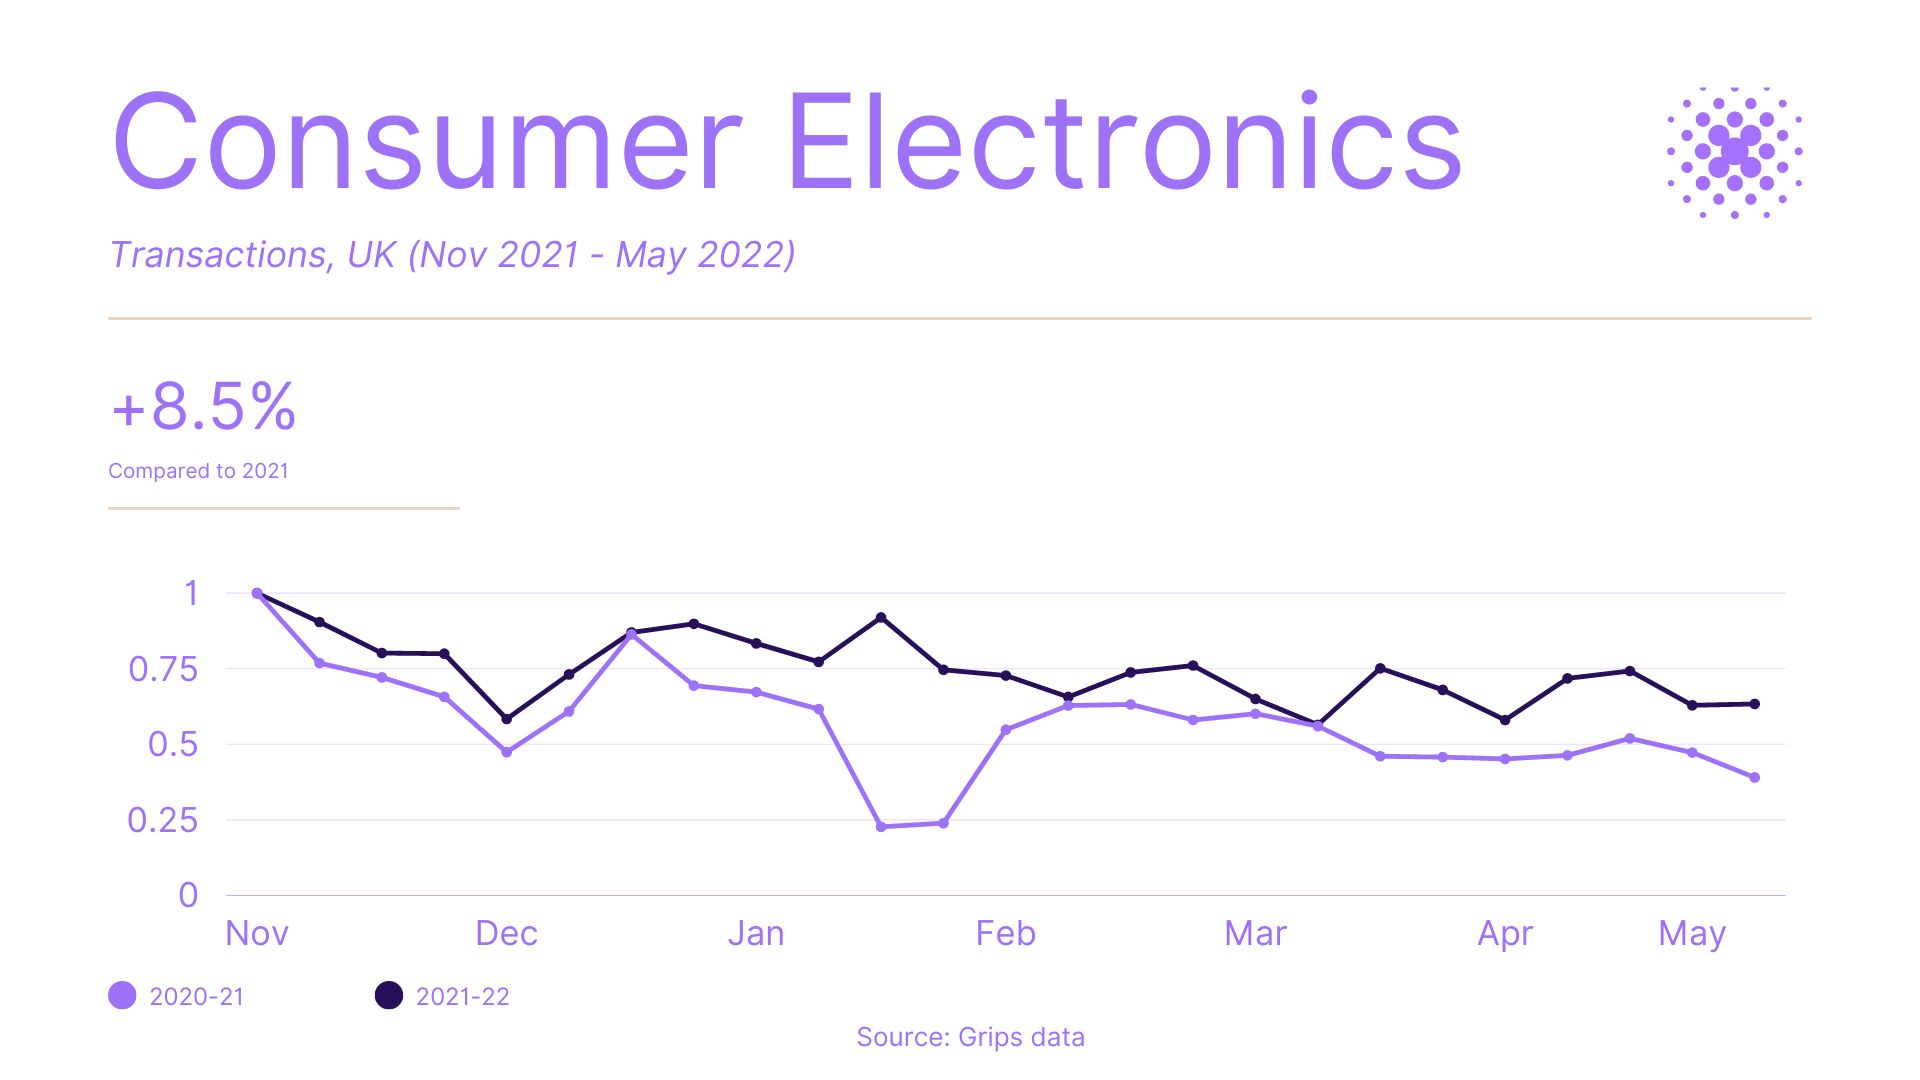 transactions in the consumer electronics industry in the uk